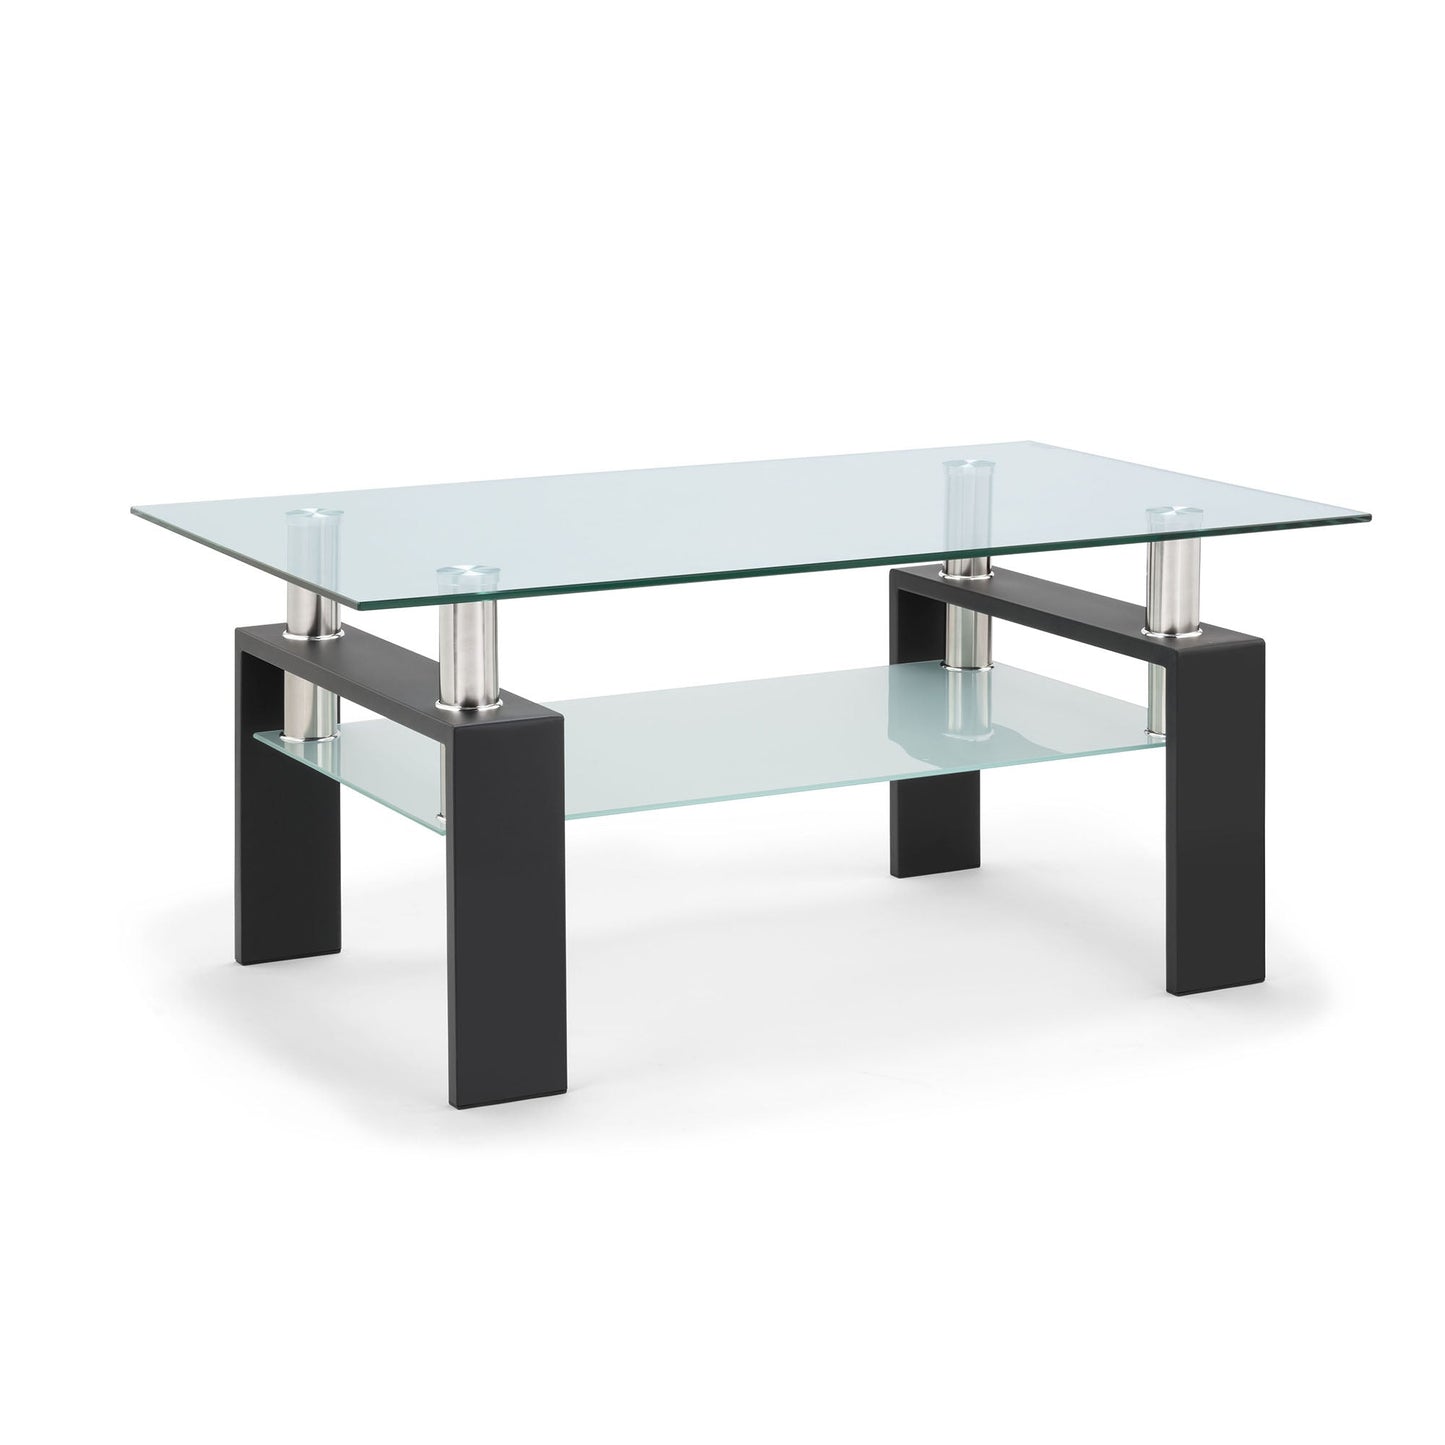 Rectangle, Modern Side Center Table with Shelf & Metal Legs, Mid-Century Tempered Glass Top Tea Table for Living Room, Home Furniture Cocktail Coffee Table - Clear, B1263